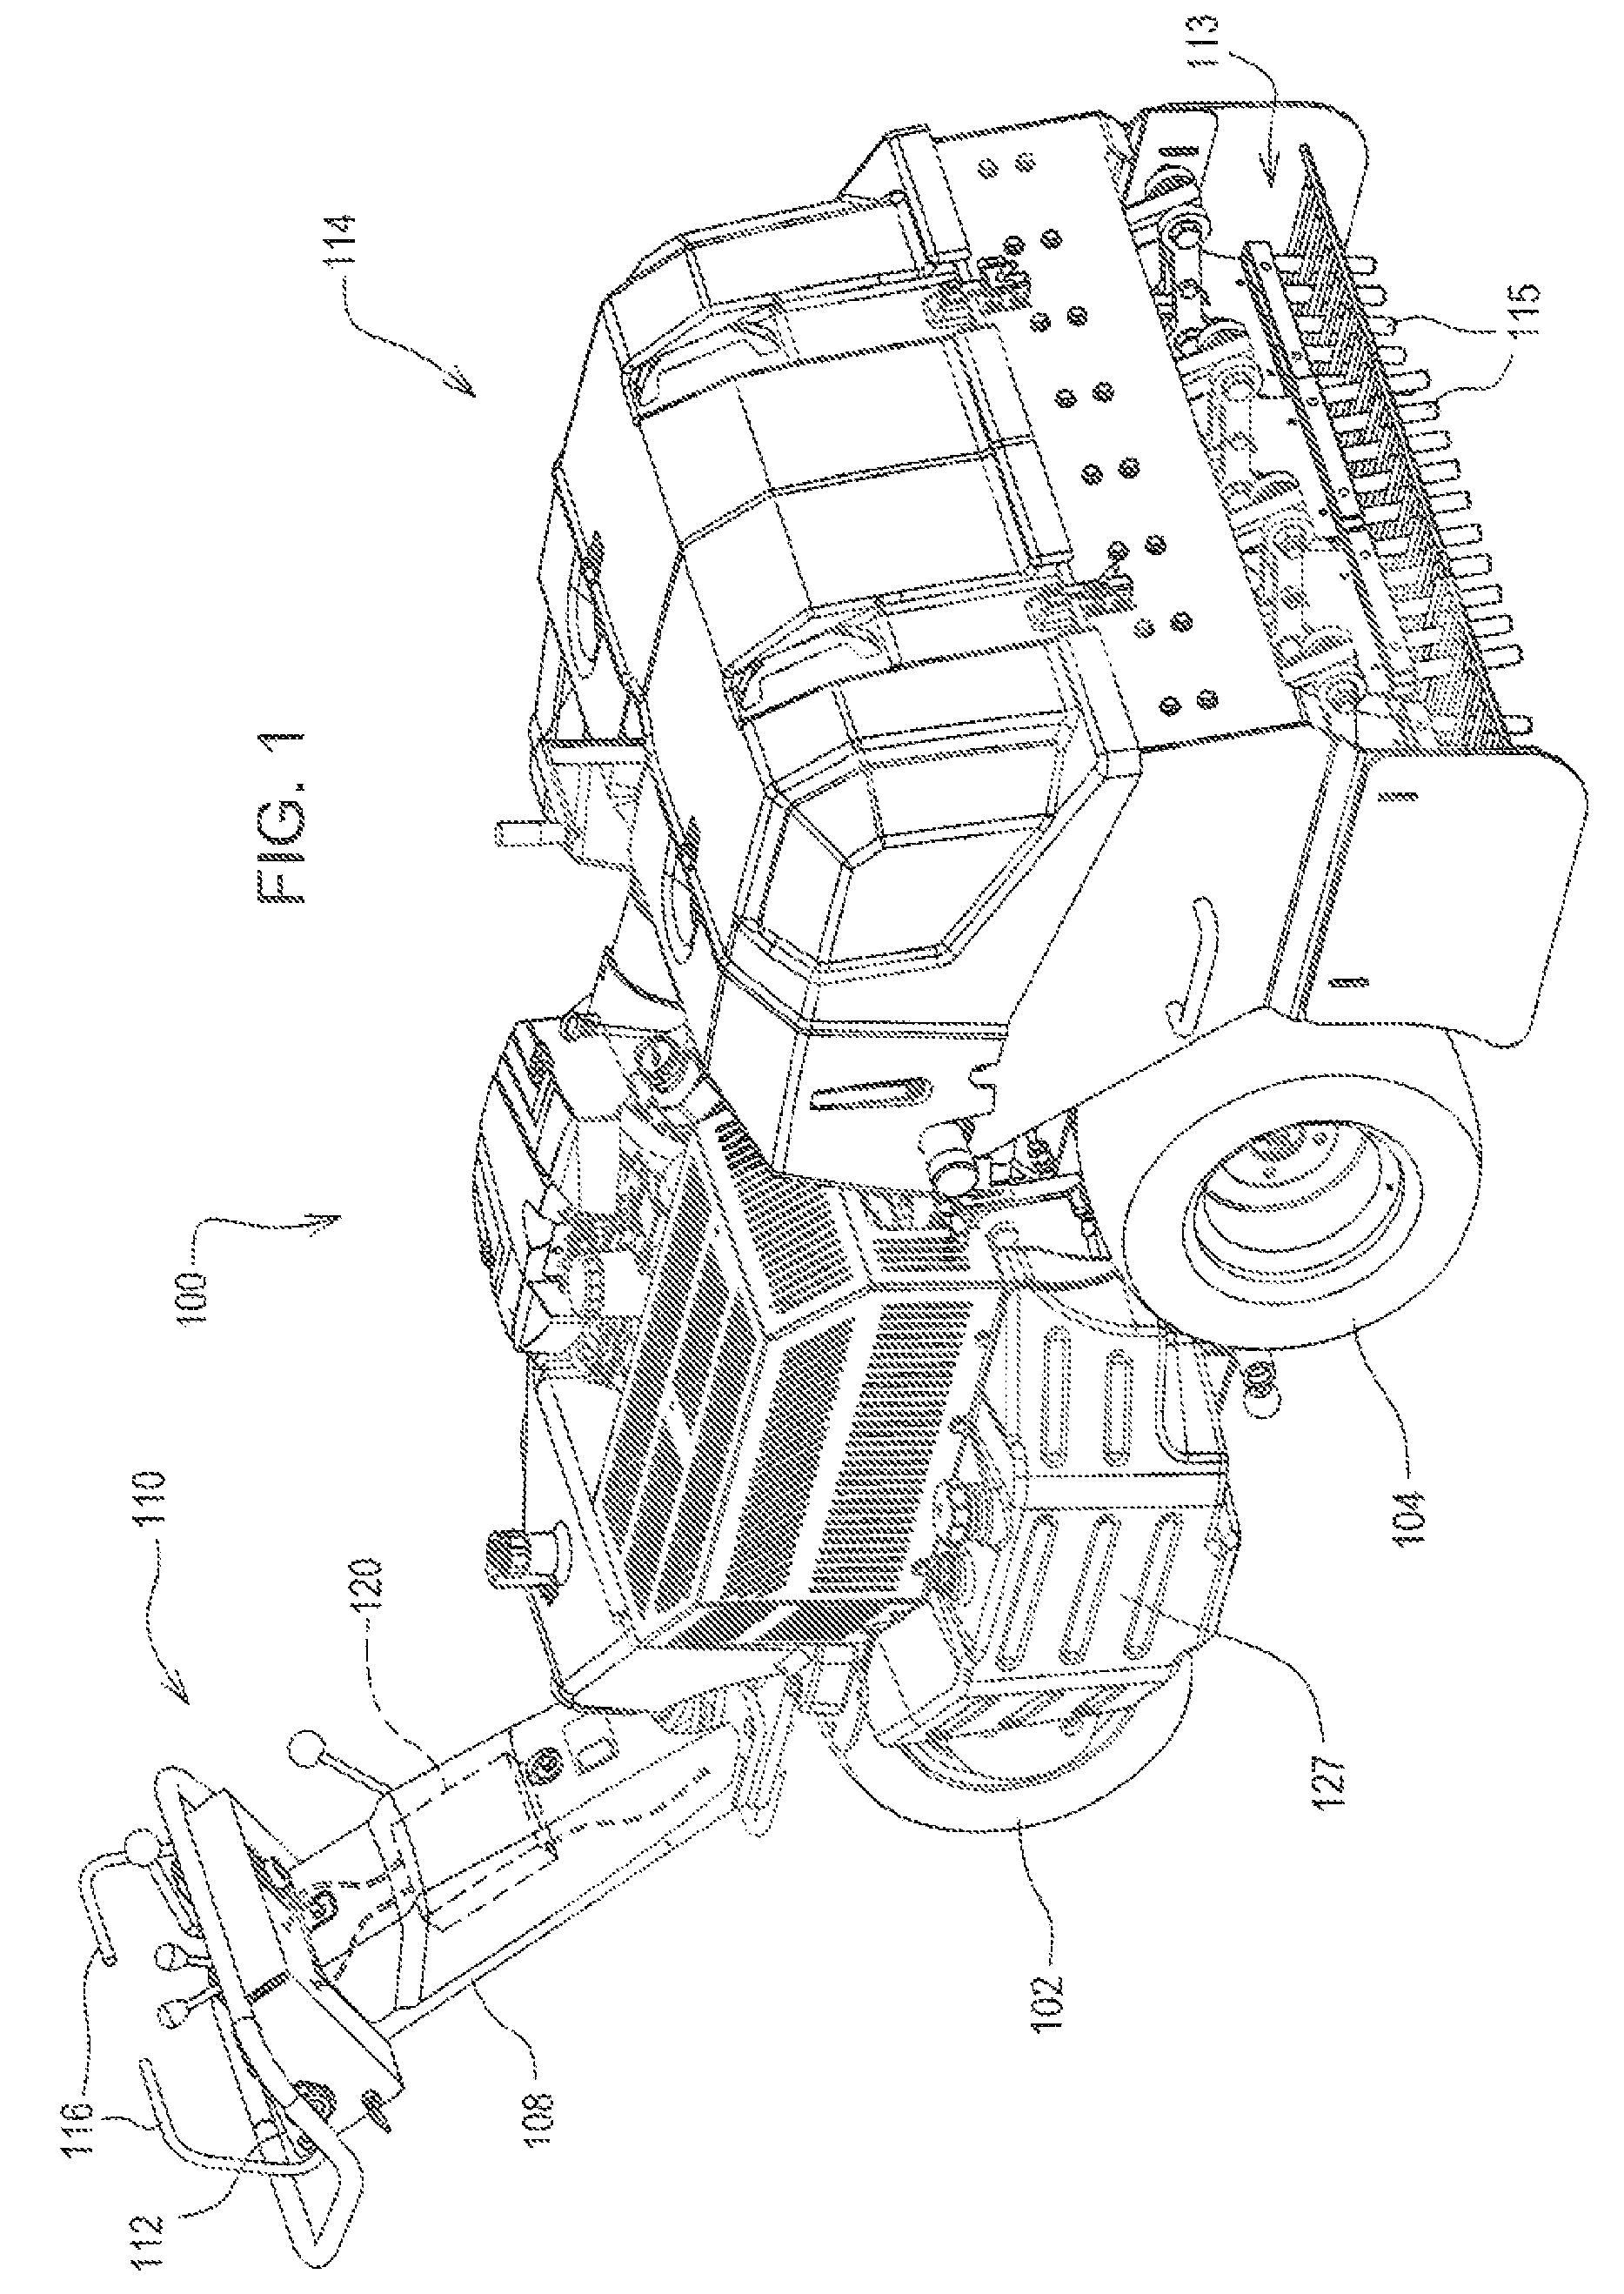 Aerator with low fuel level control